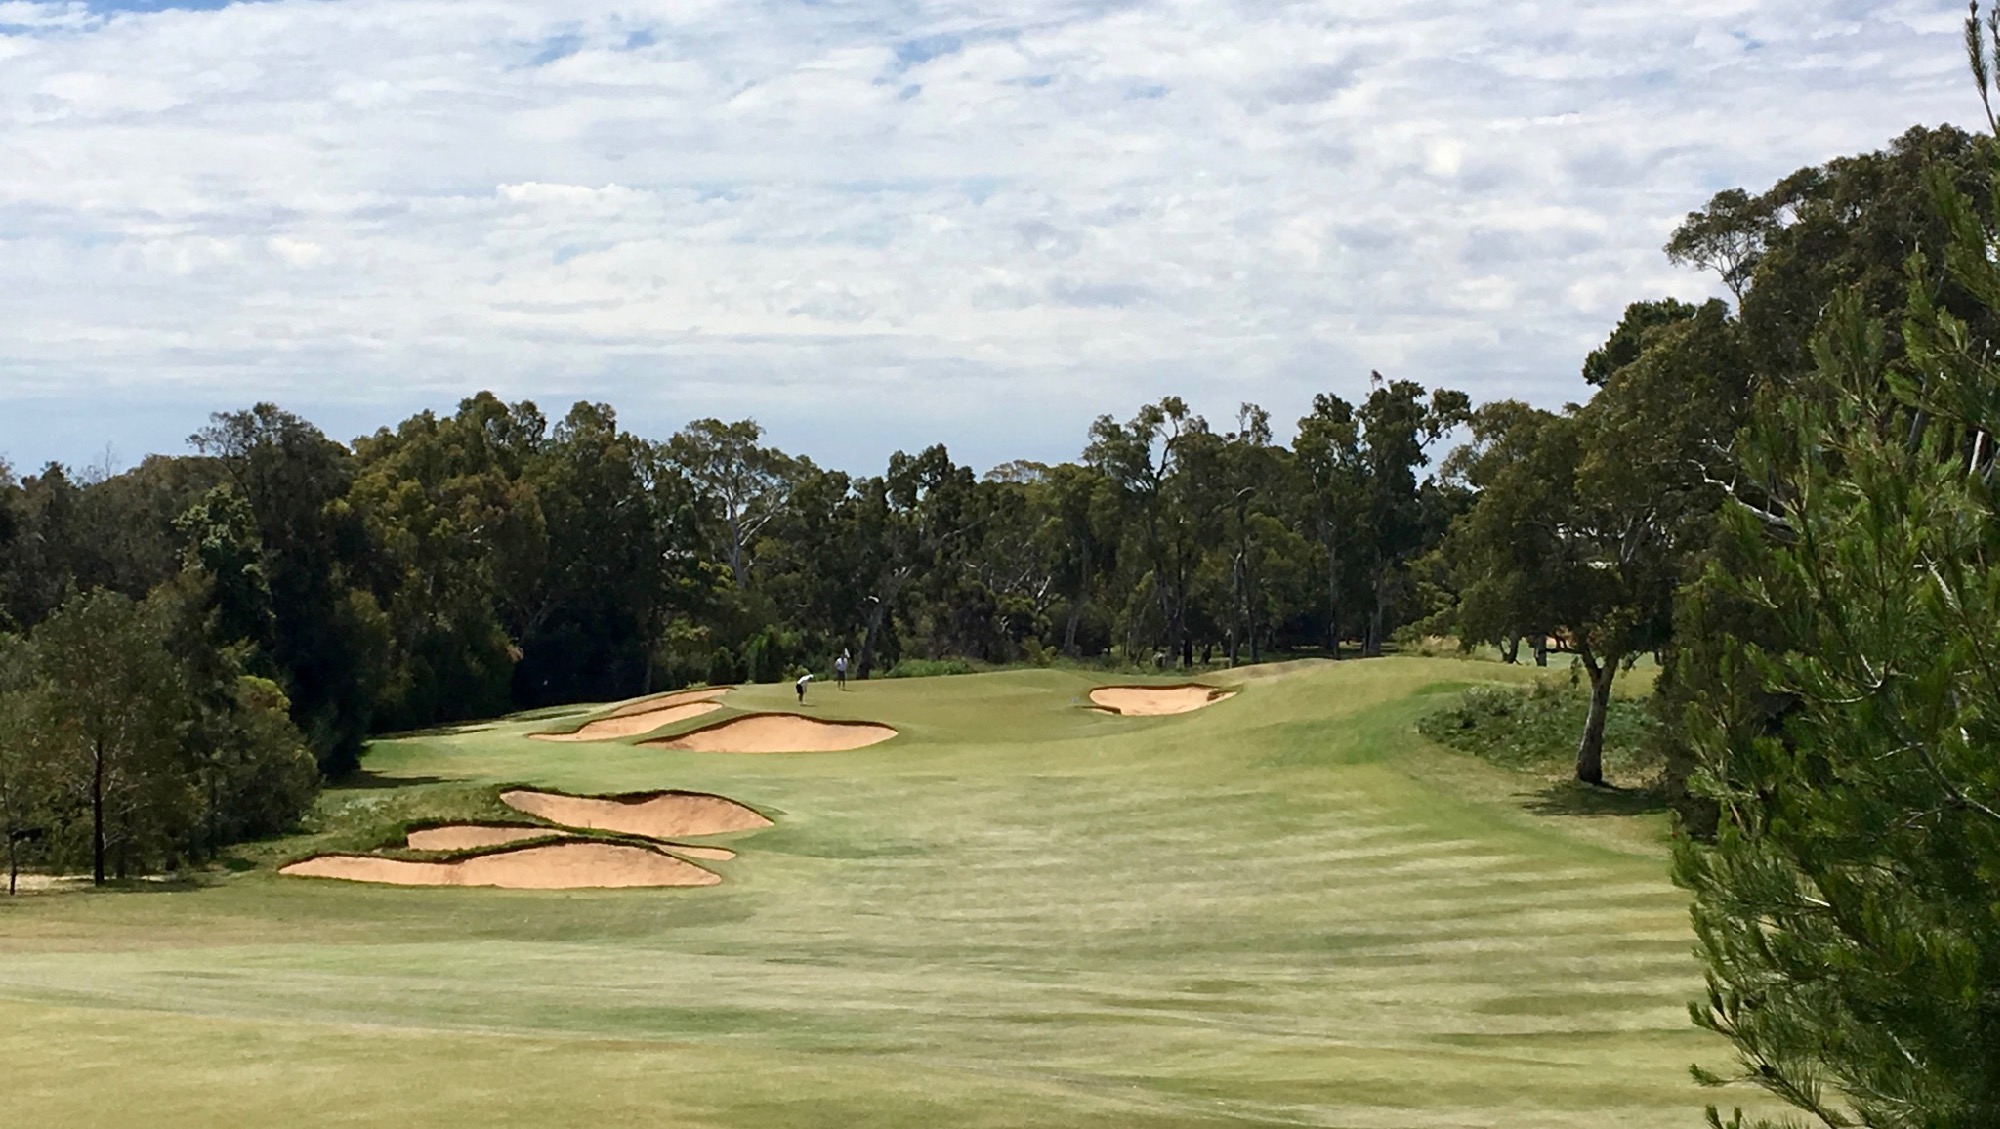 Kooyonga GC- the approach to the 4th hole